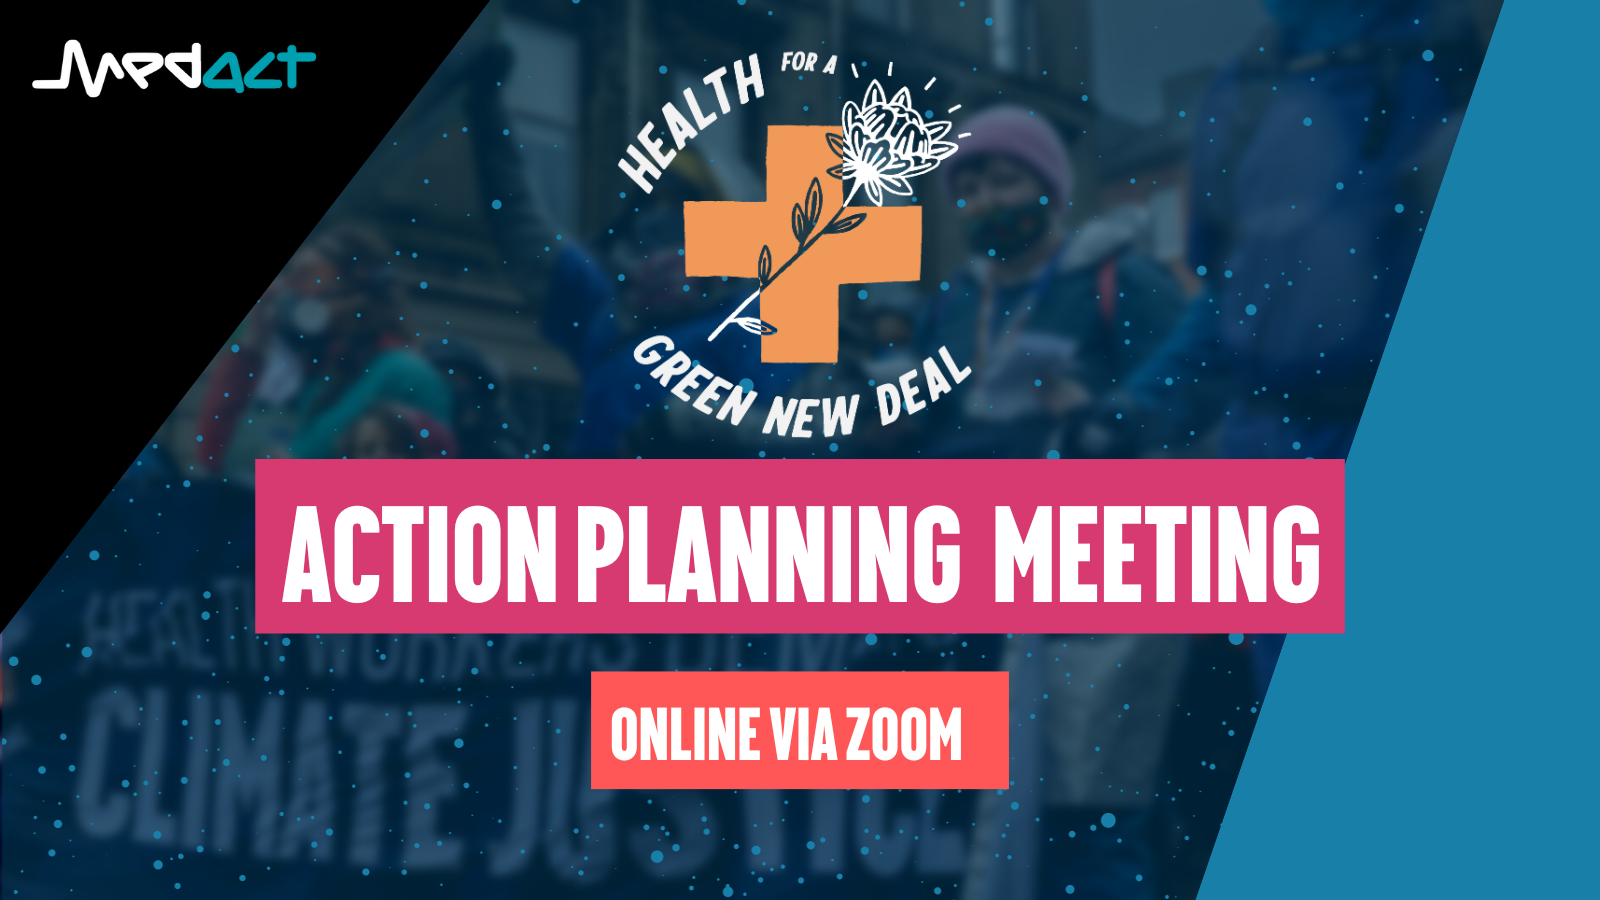 Health for a Green New Deal: March Action Planning Meeting